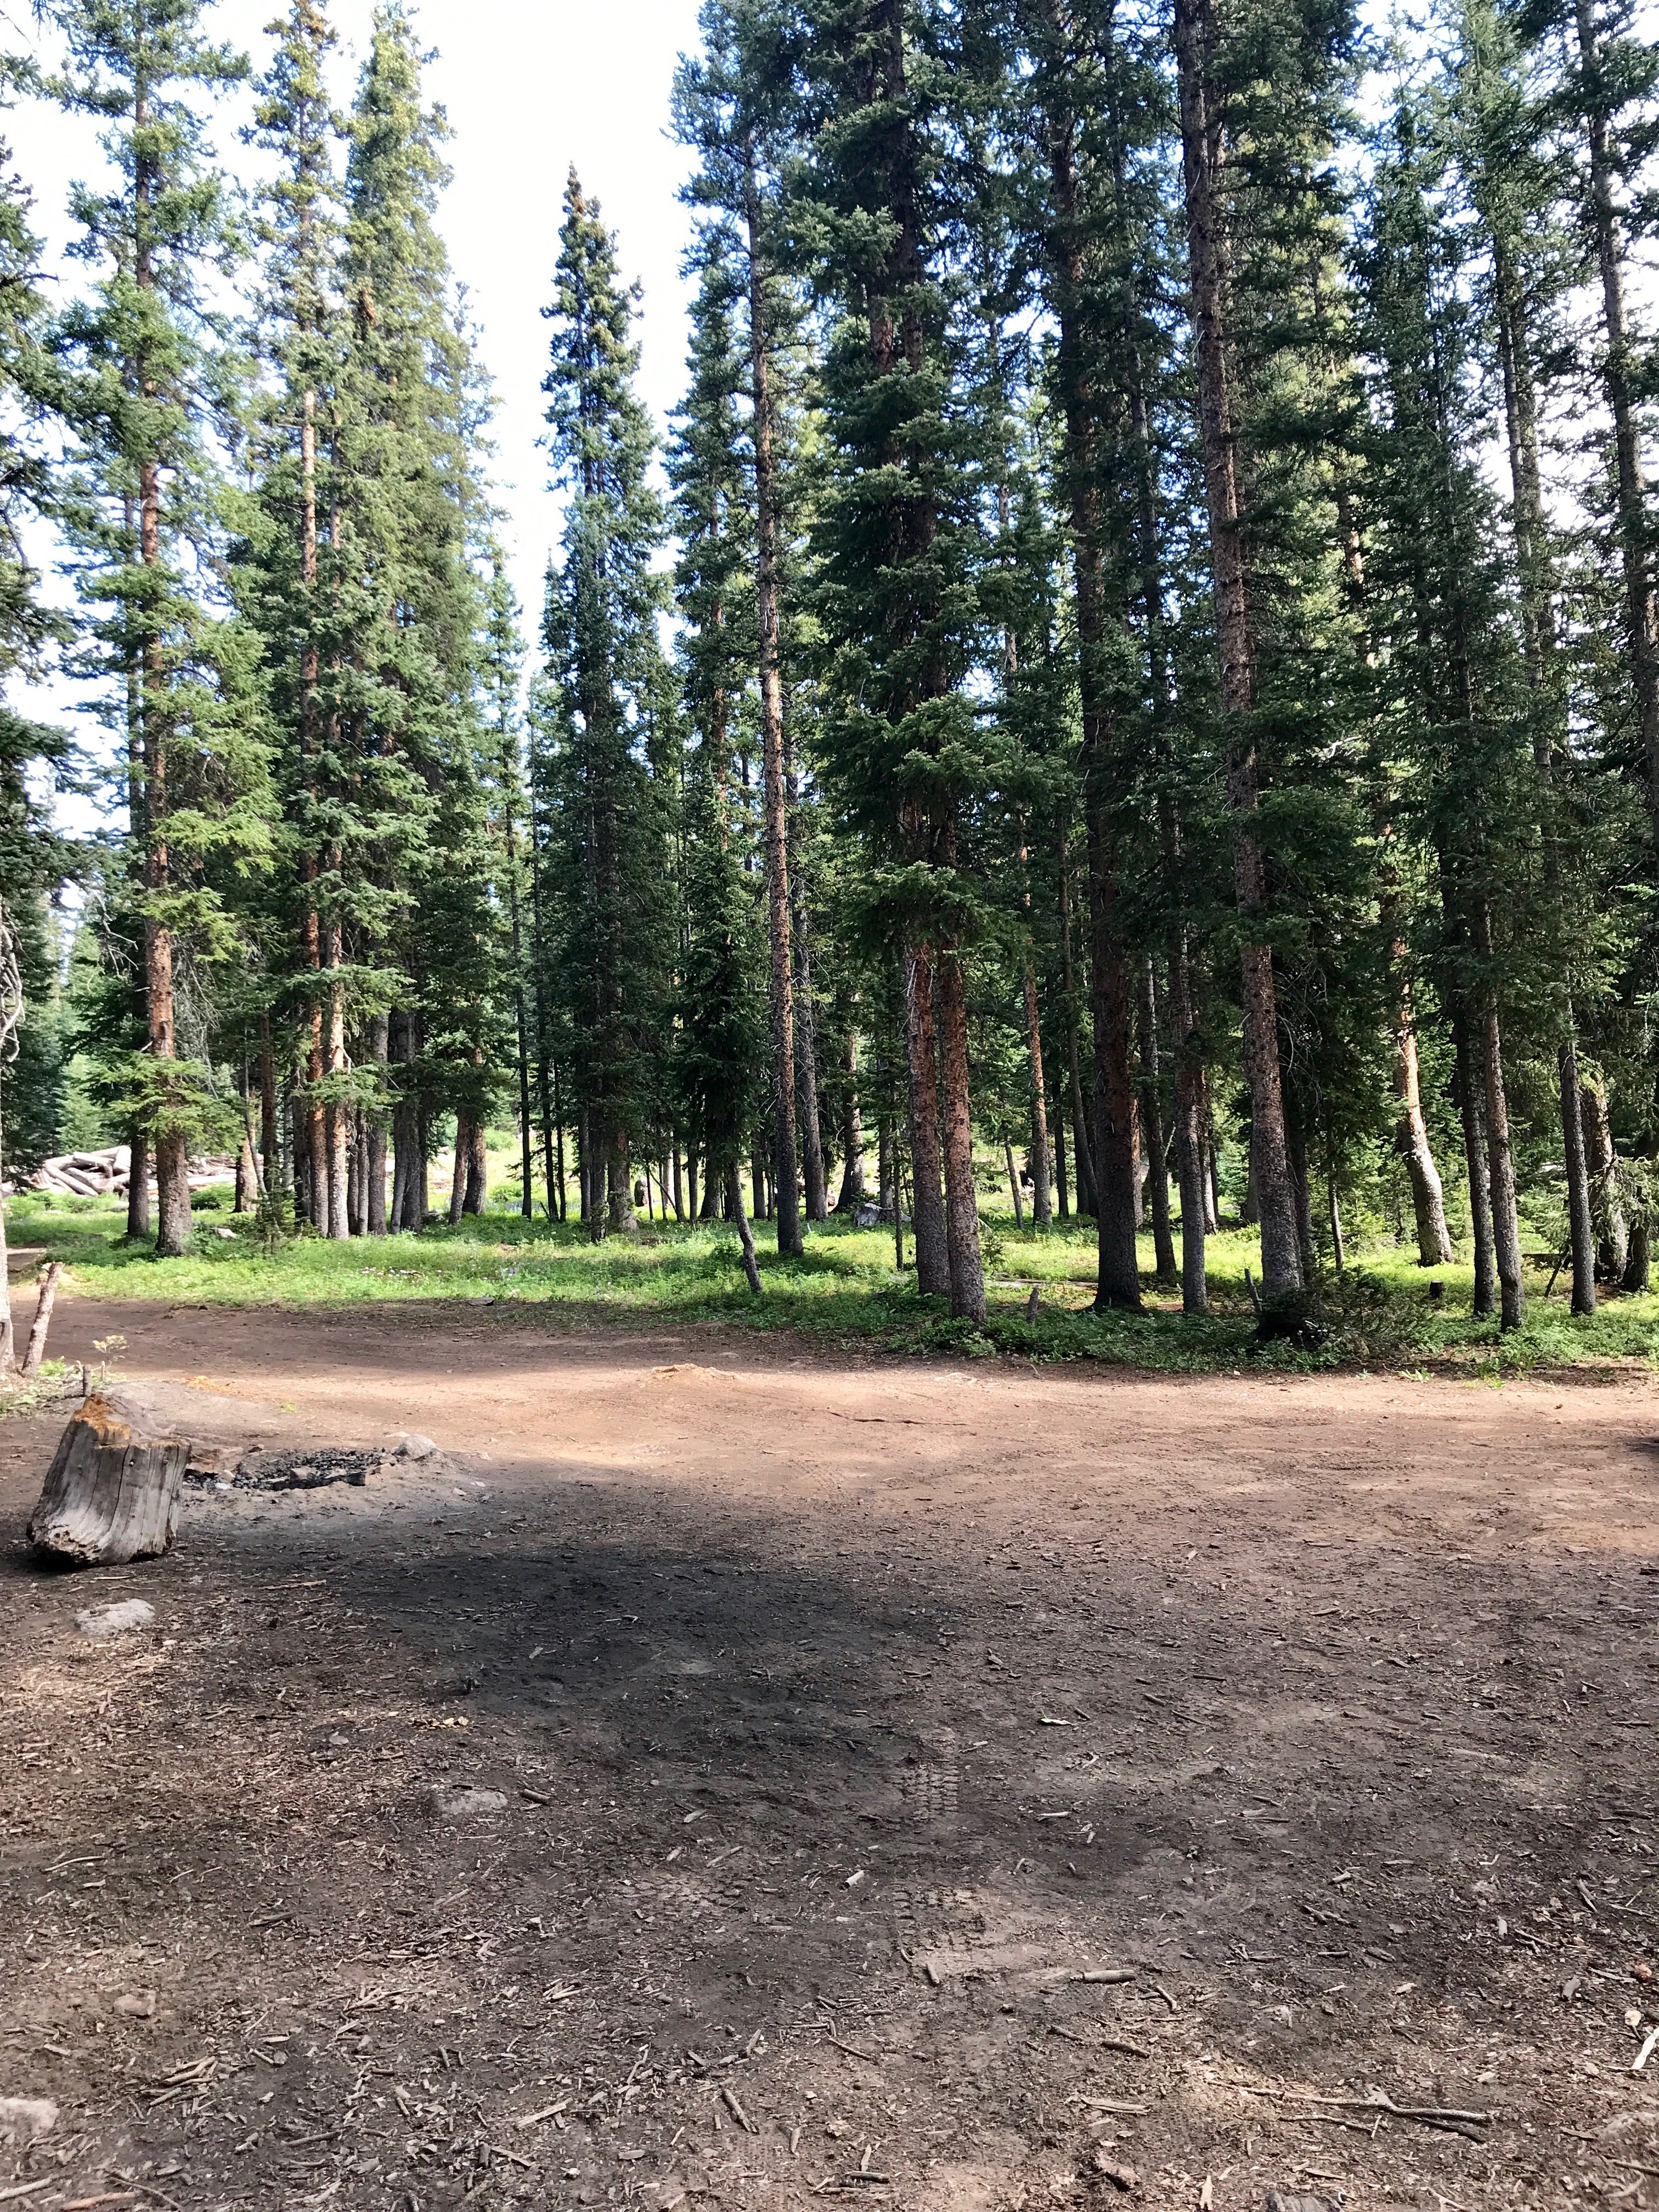 Camper submitted image from Eagle-Holy Cross Ranger District (Vail-Eagle area) - 2